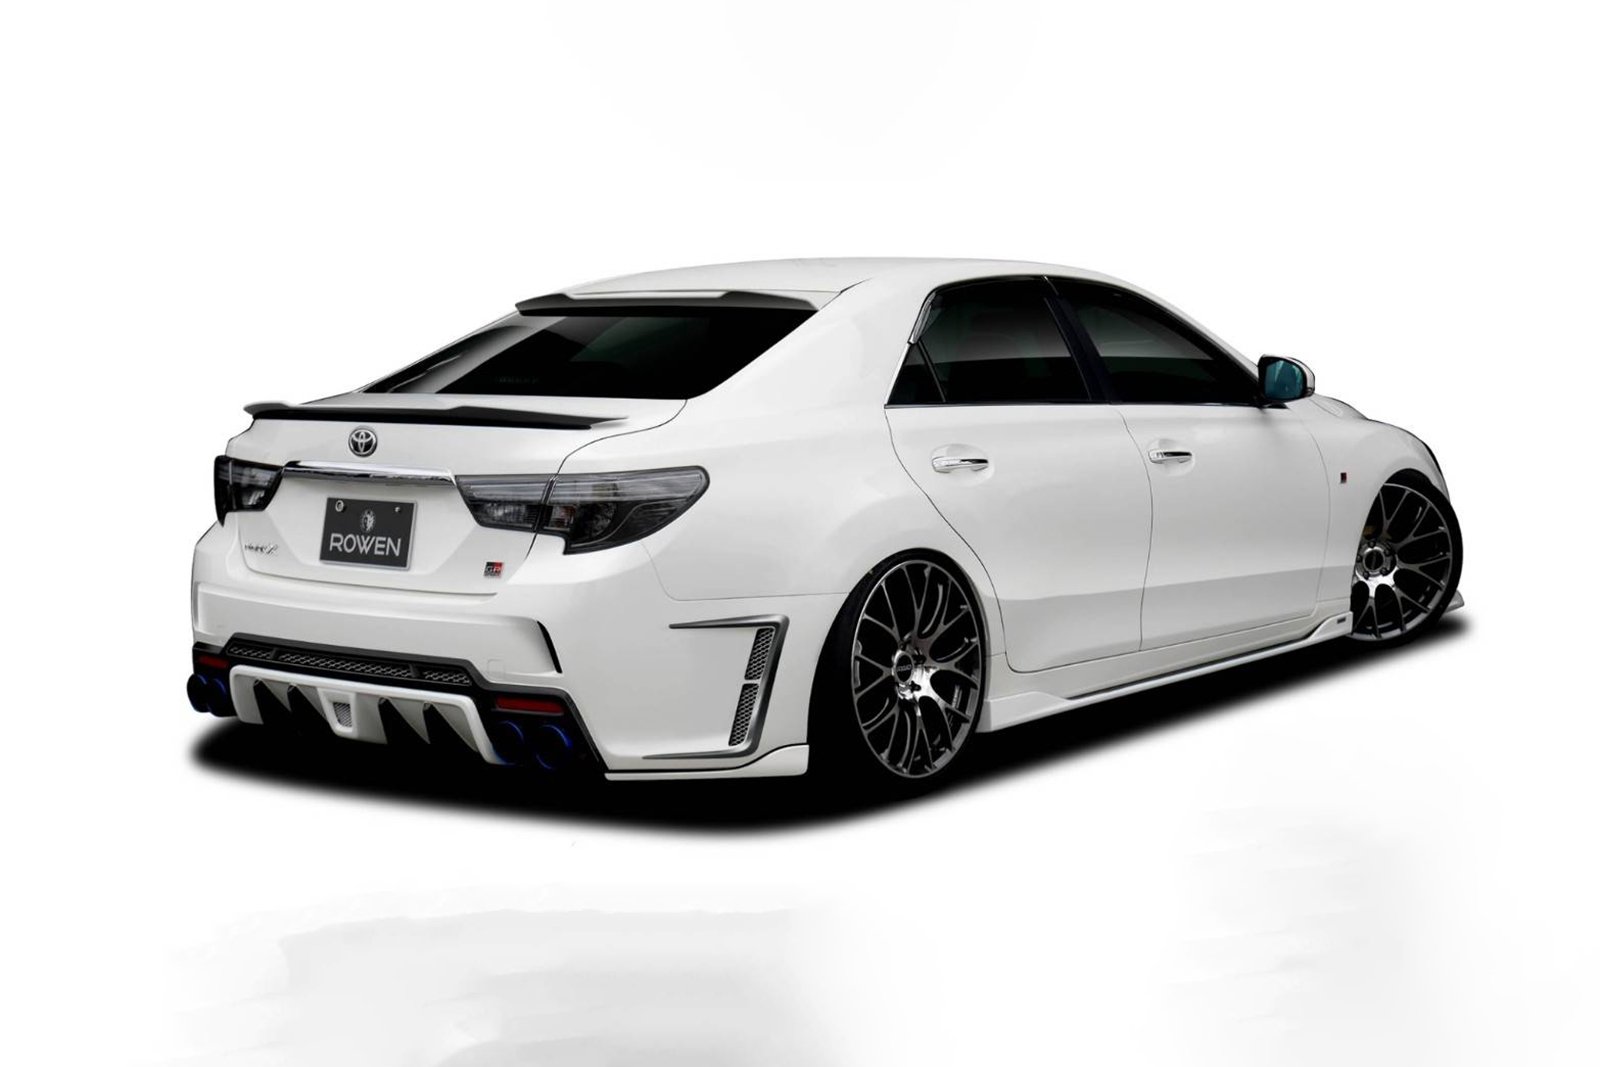 Rowen body kit for Toyota MARK X G,s（Additional Parts）ROWEN SPORT new style